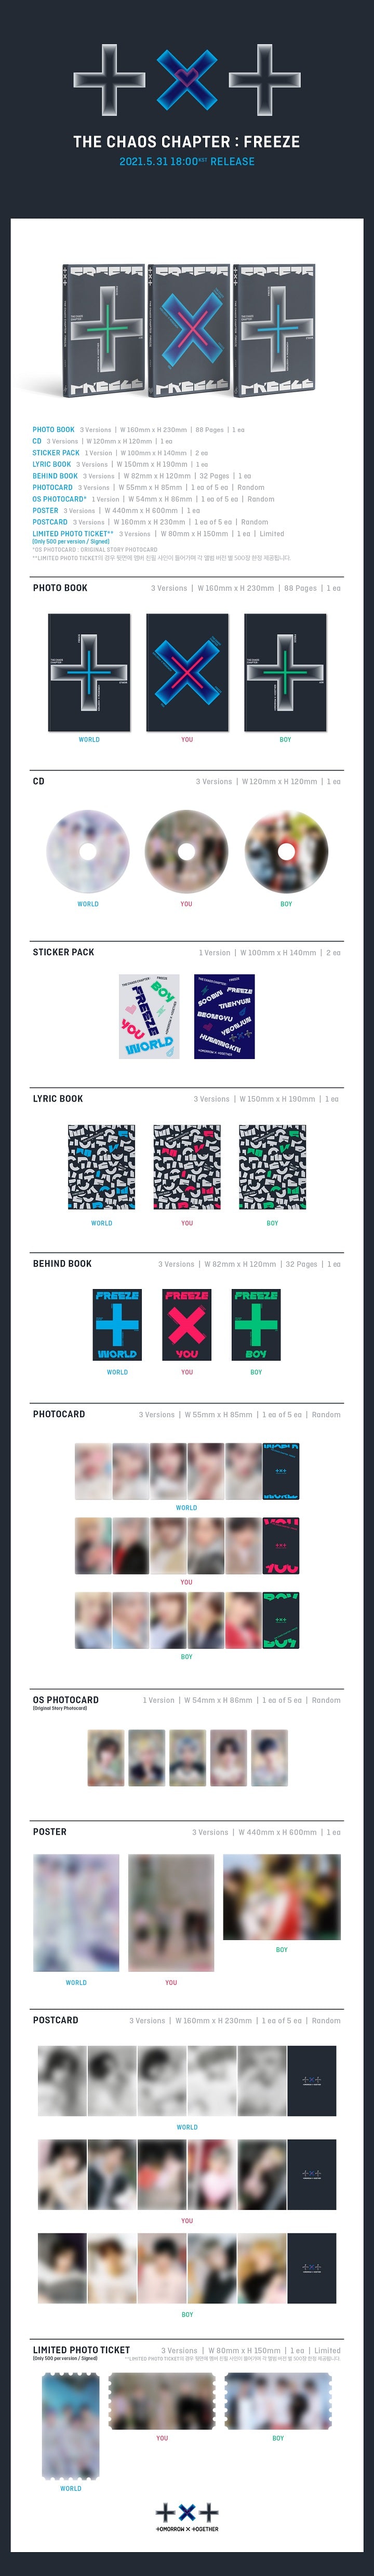 1 CD
1 Photo Book (88 pages)
2 Sticker Packs
1 Lyrics Book
1 Behind Book
1 Photo Card (random out of 5 types per version)
...